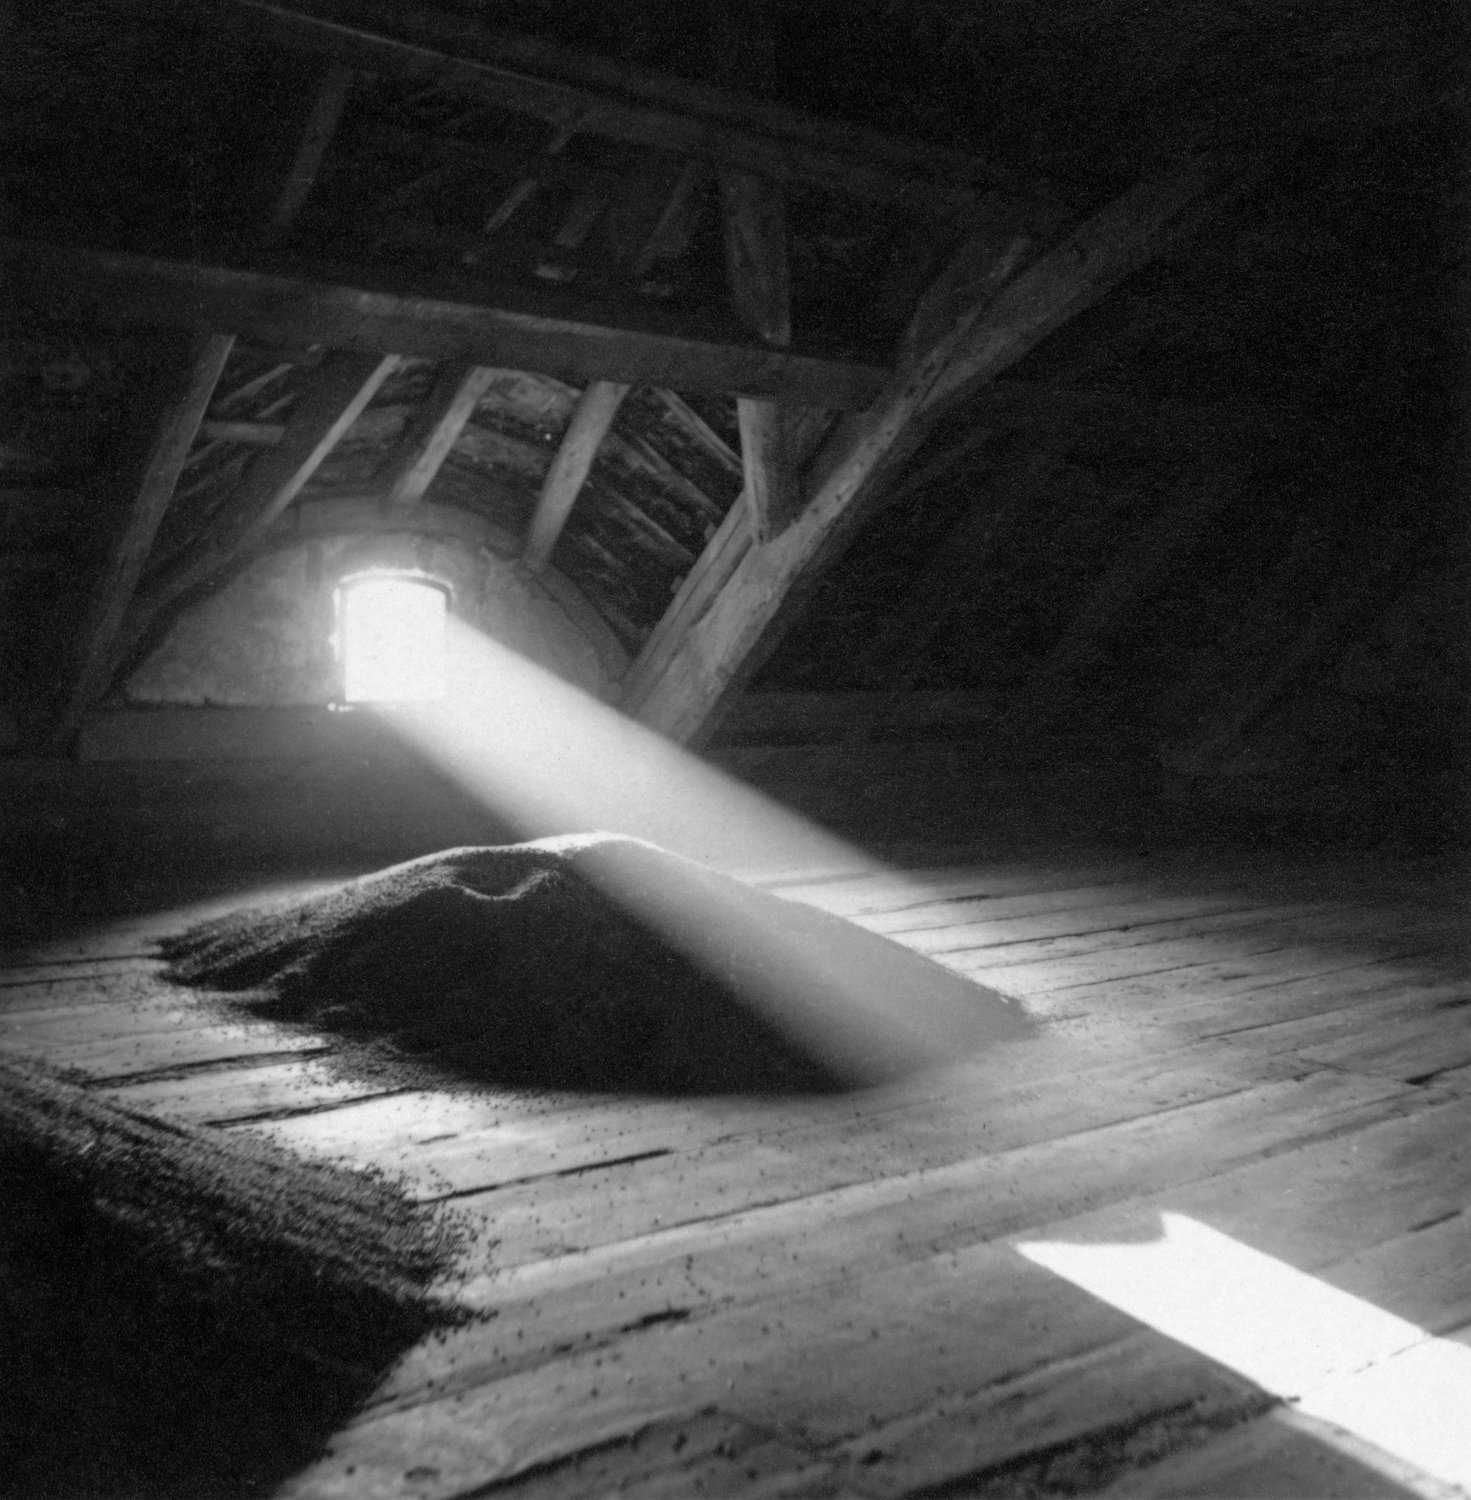 Among the photos on display will be a black and white print of a barn interior with sunlight pouring through a lone window onto a triangular pillar of grain.